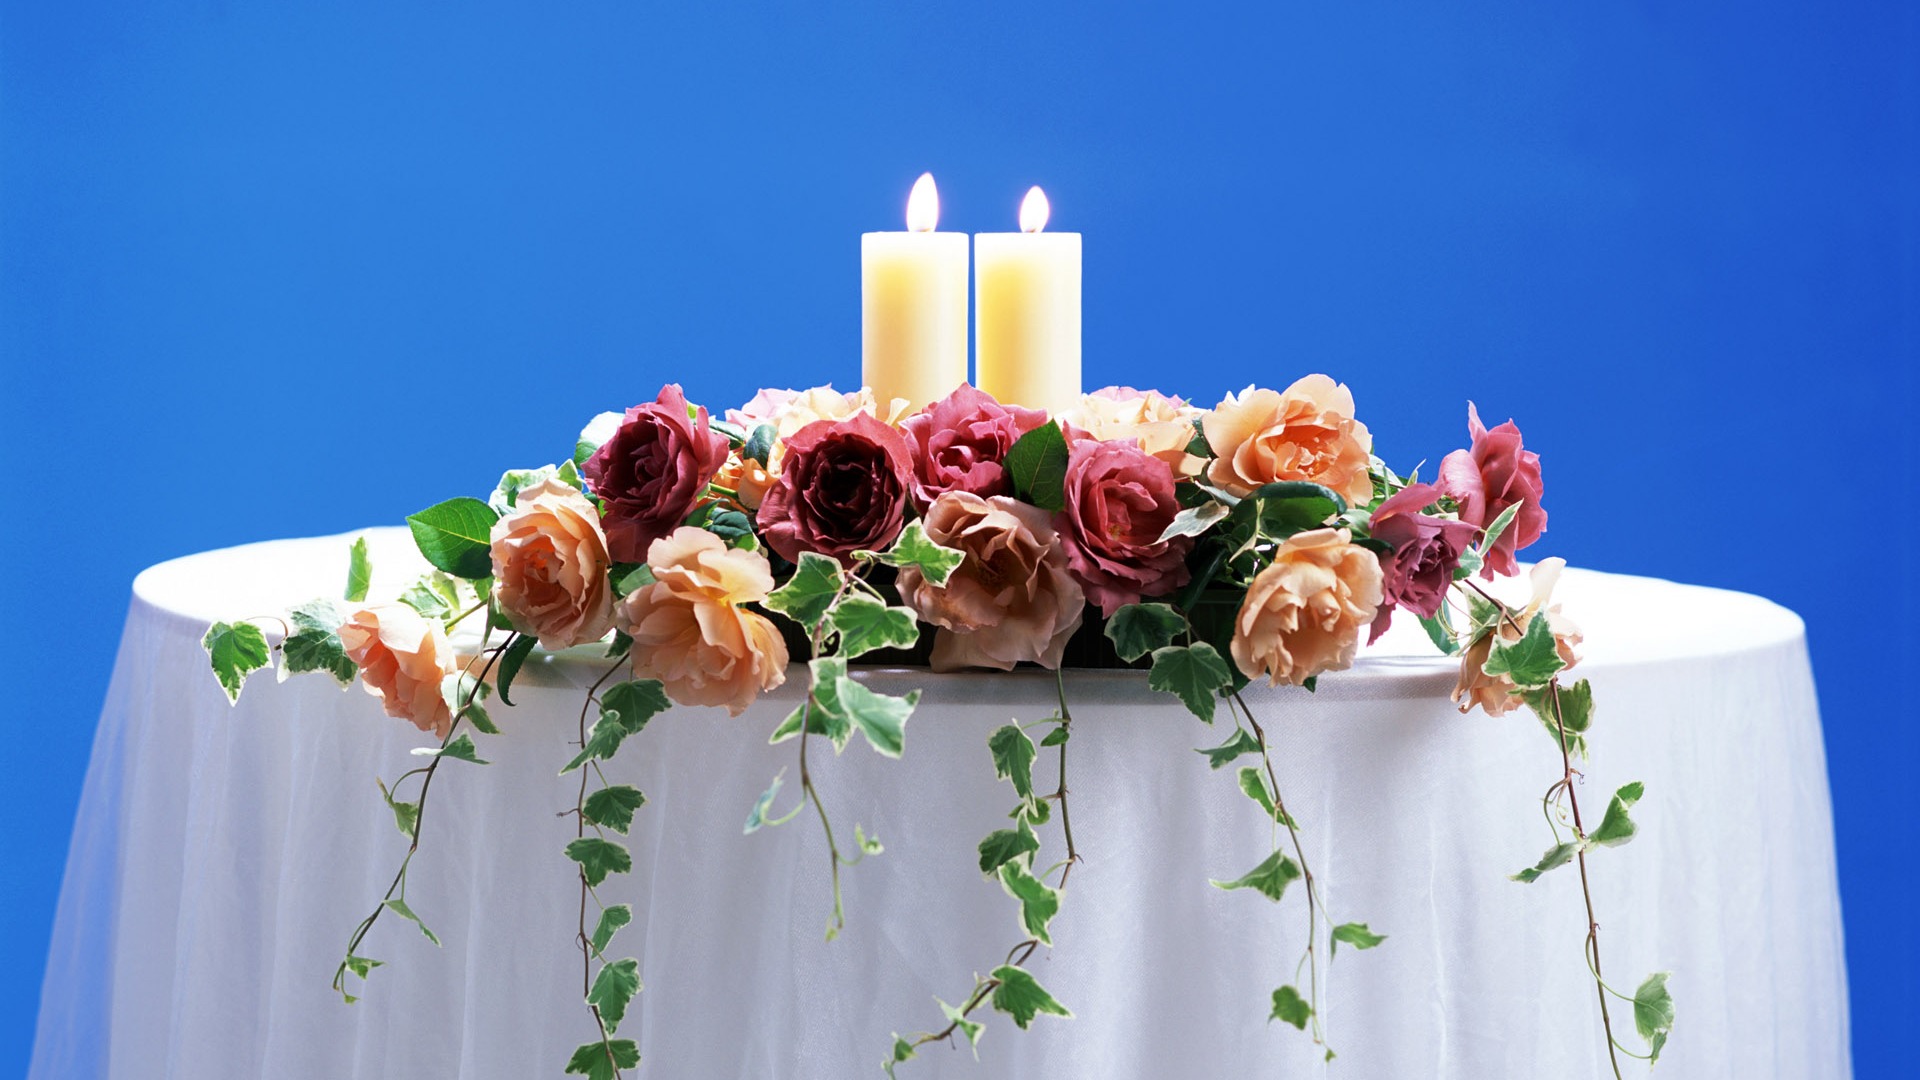 Weddings and Flowers wallpaper (2) #13 - 1920x1080